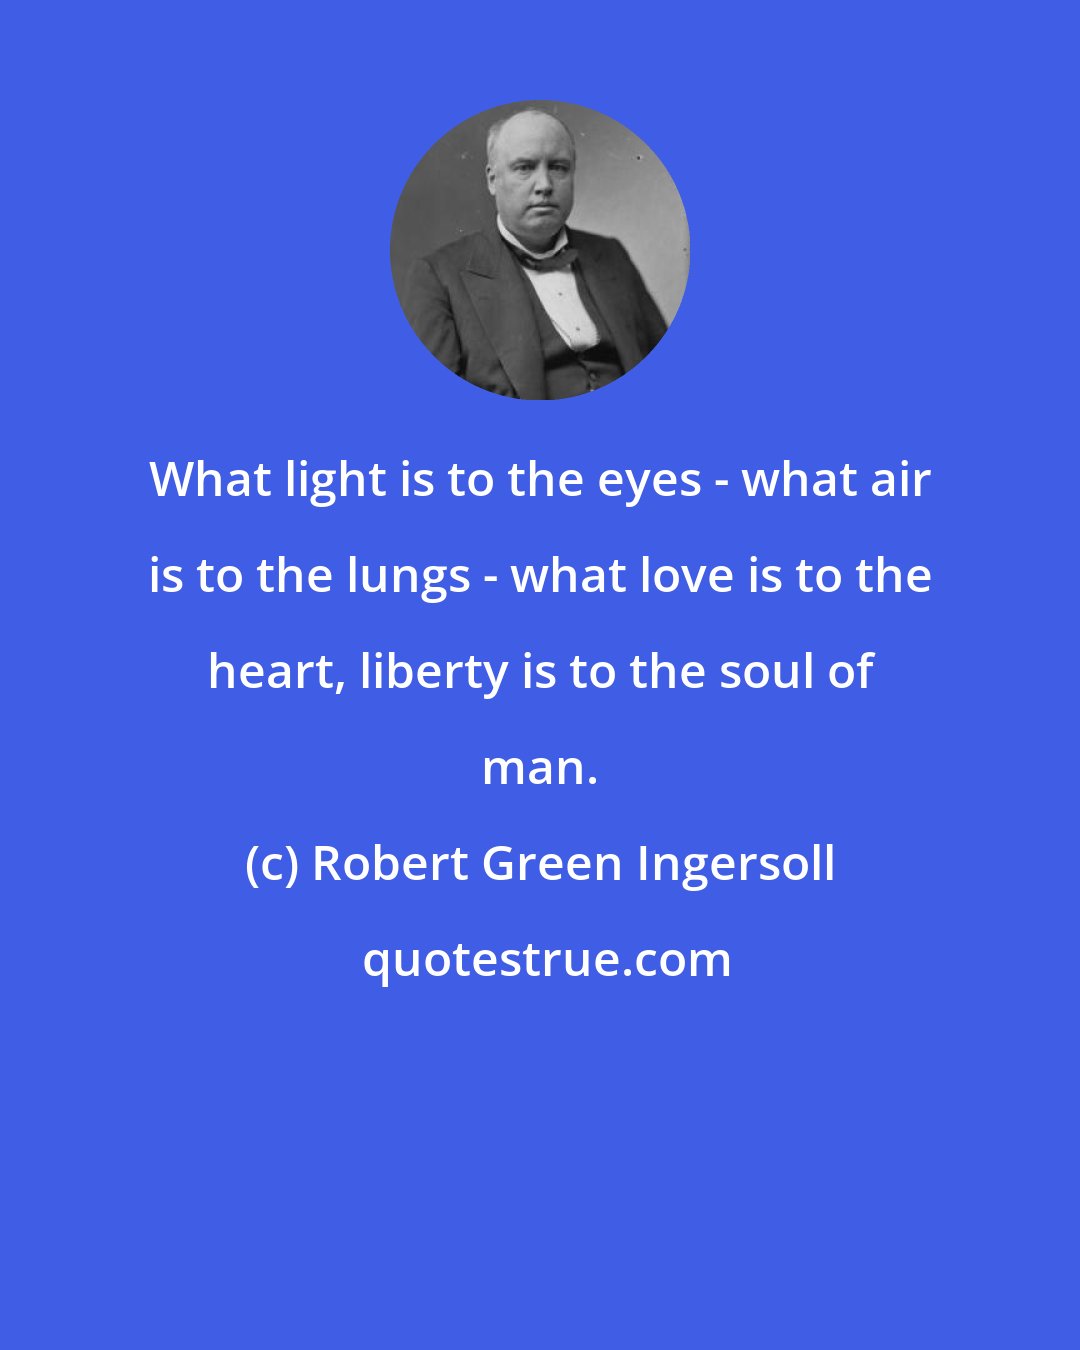 Robert Green Ingersoll: What light is to the eyes - what air is to the lungs - what love is to the heart, liberty is to the soul of man.